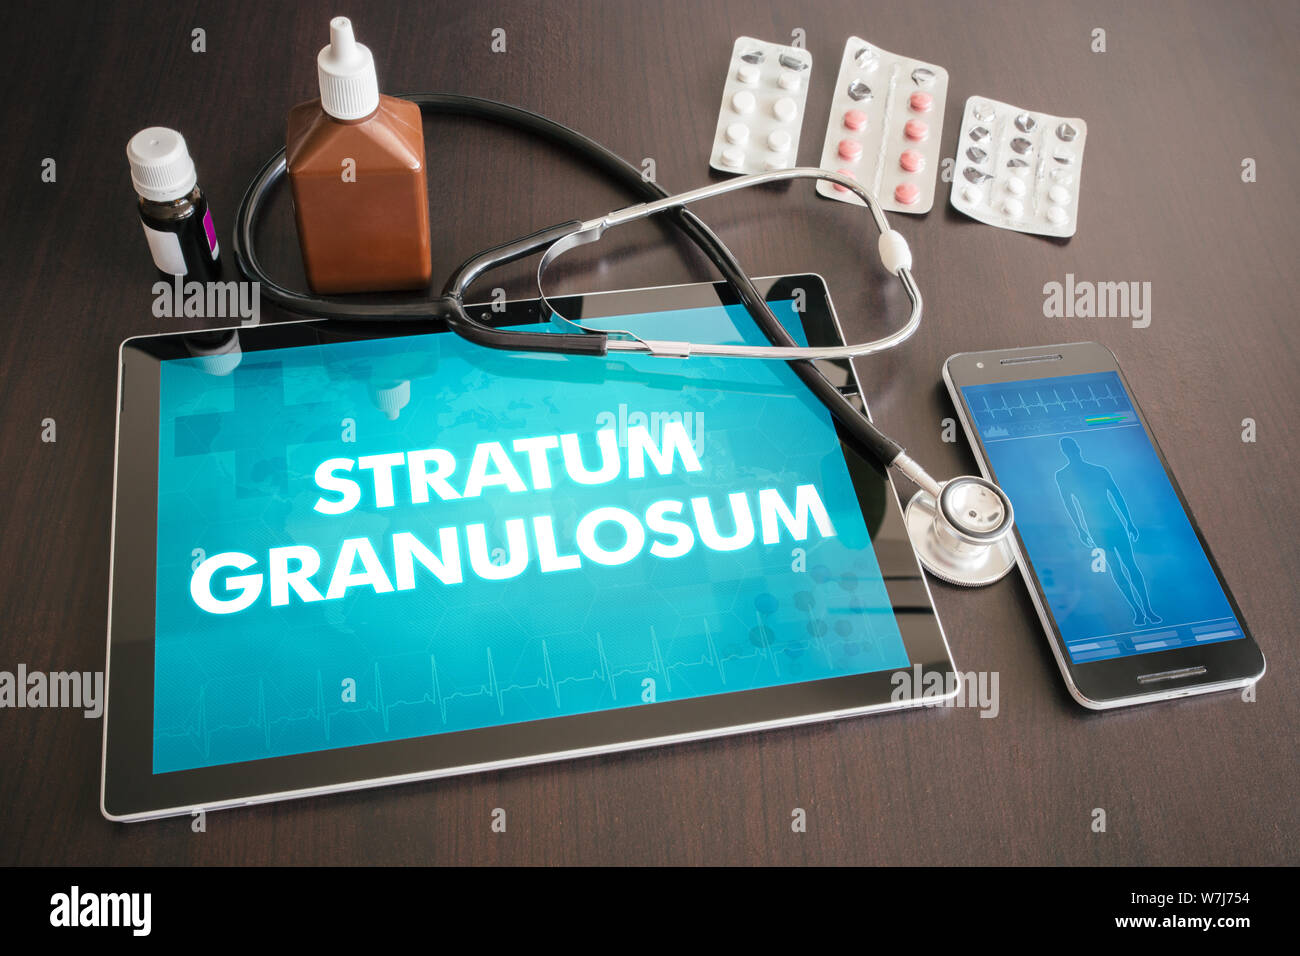 Stratum granulosum (cutaneous disease related) diagnosis medical concept on tablet screen with stethoscope. Stock Photo